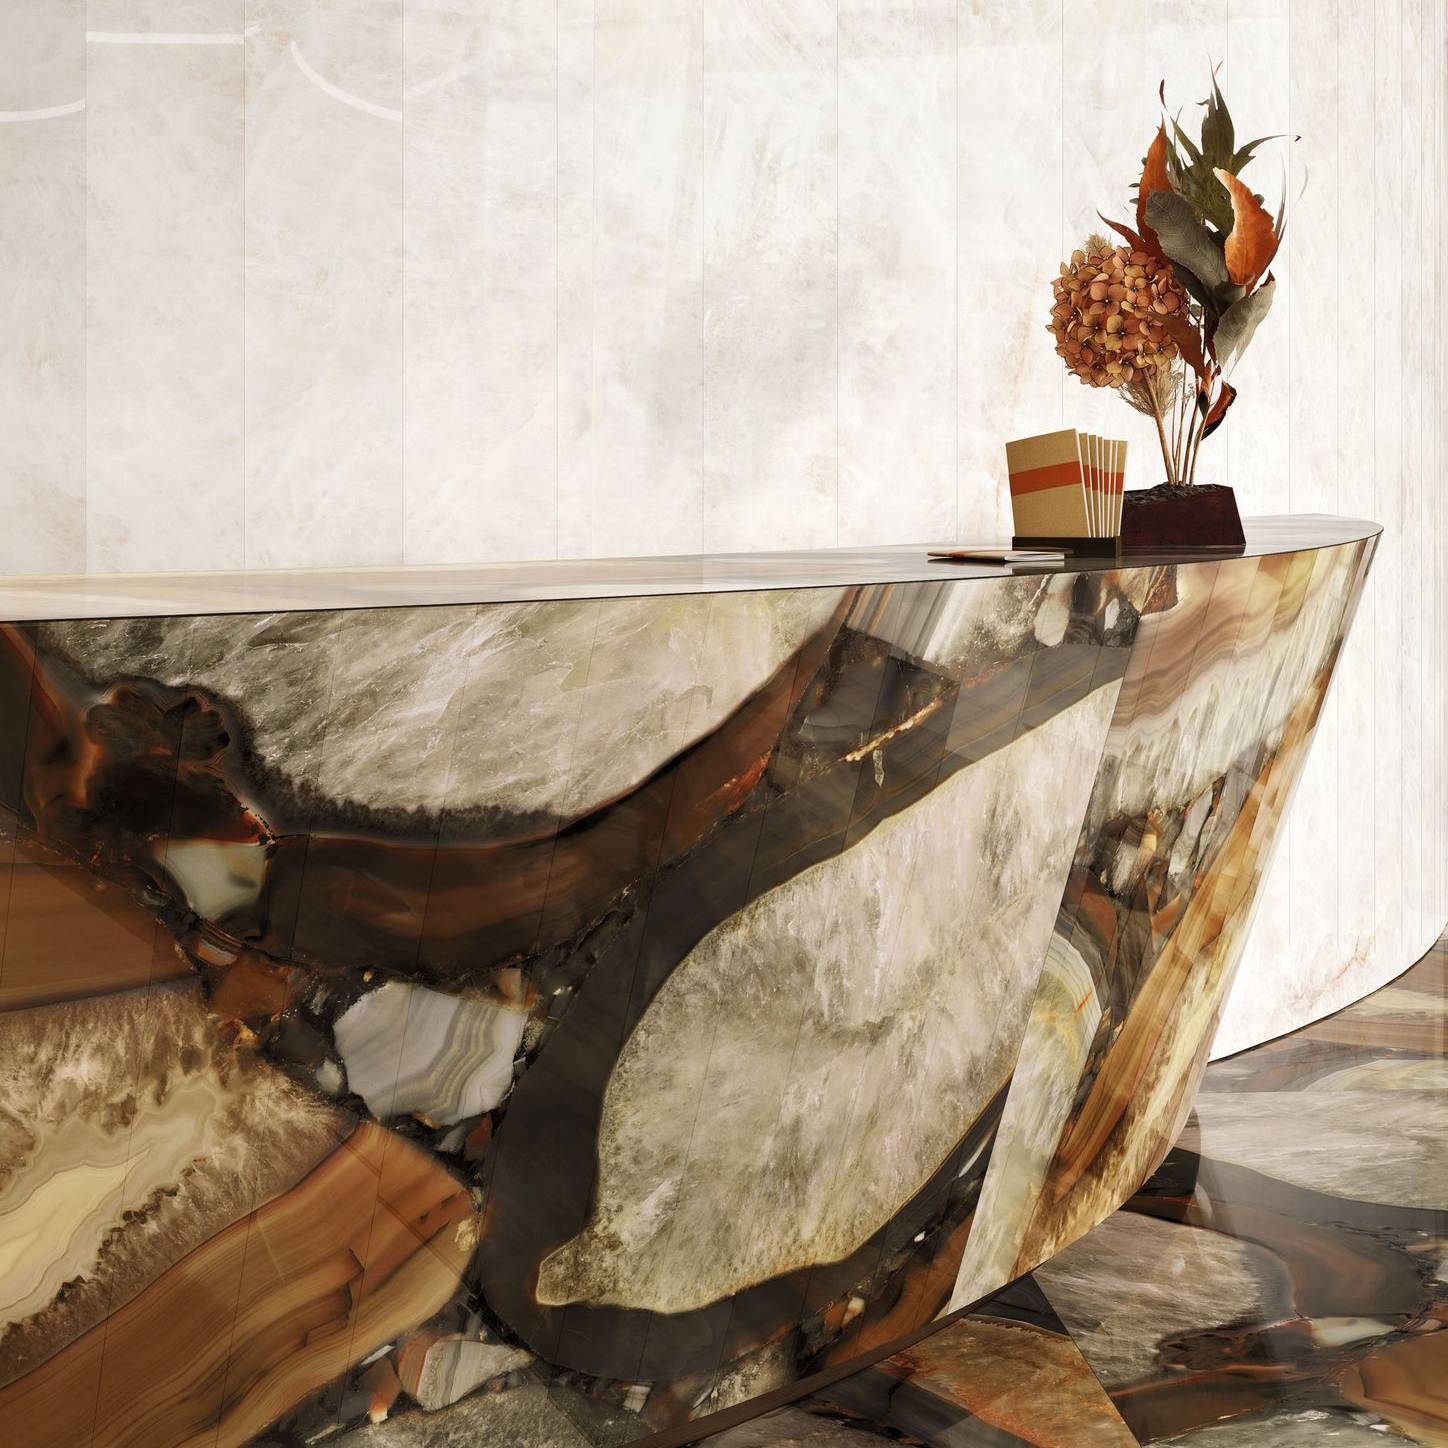 Precious 2 | Stones And More | Finest selection of Mosaics, Glass, Tile and Stone